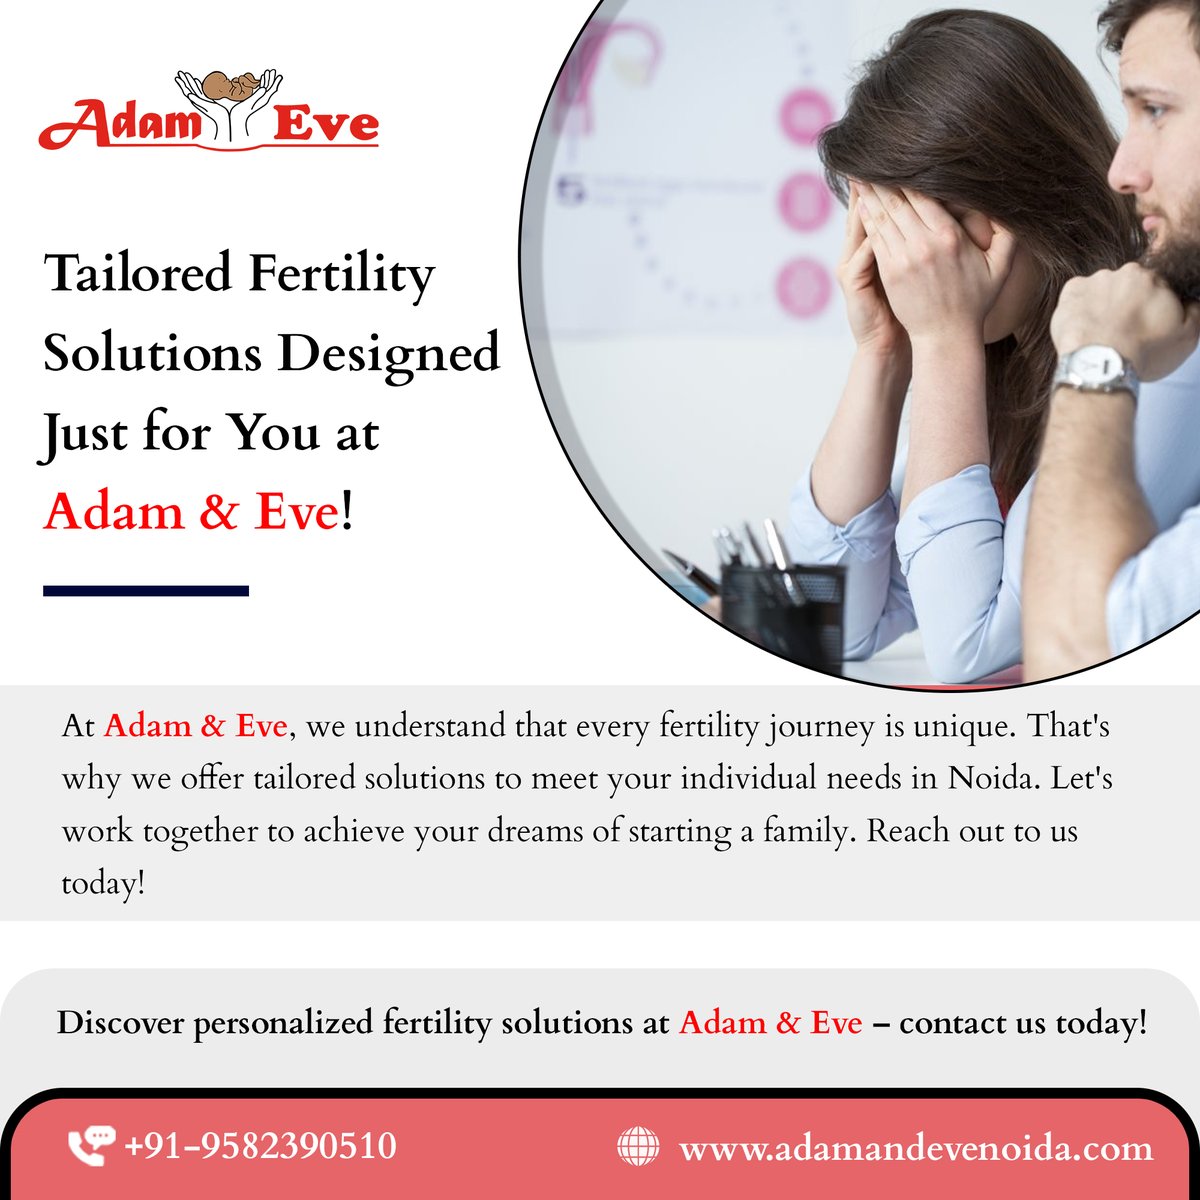 Every family story is unique. At Adam and Eve Noida, we celebrate yours. Share your fertility journey with us. 
𝗕𝗼𝗼𝗸 𝗬𝗼𝘂𝗿 𝗙𝗶𝗿𝘀𝘁 𝗙𝗿𝗲𝗲 𝗔𝗽𝗽𝗼𝗶𝗻𝘁𝗺𝗲𝗻𝘁:
𝗖𝗮𝗹𝗹 +𝟵𝟭-𝟳𝟲𝟲𝟵𝟴𝟬𝟱𝟲𝟬𝟬
#FertilityClinic #AdamAndEveNoida #WeBelieveInYou #YourStoryMatters